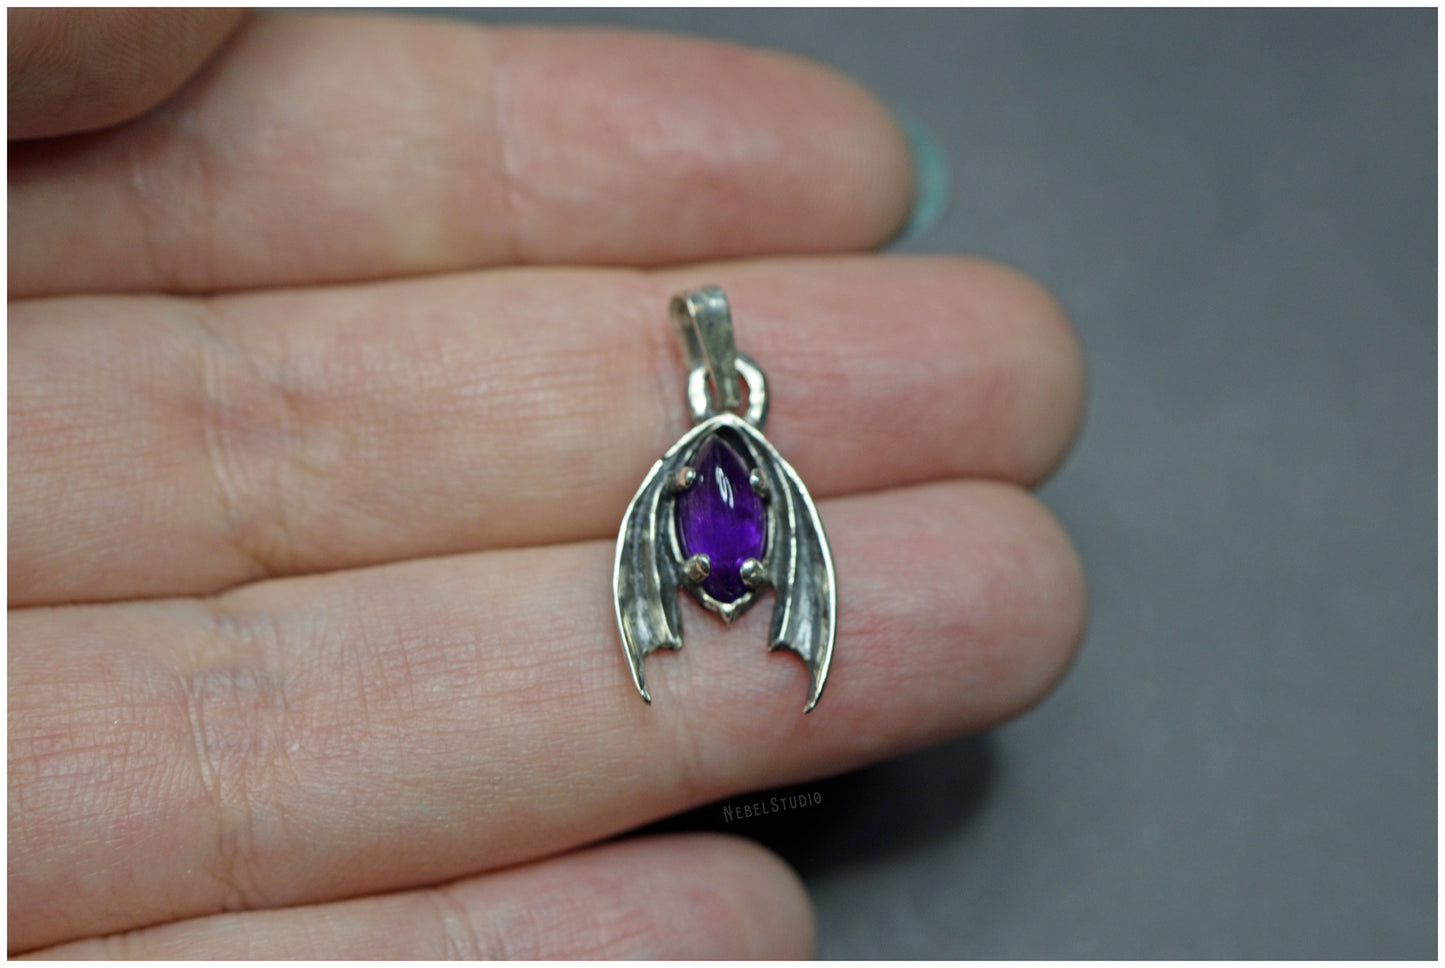 Pendant Bat! Silver with marquise amethyst